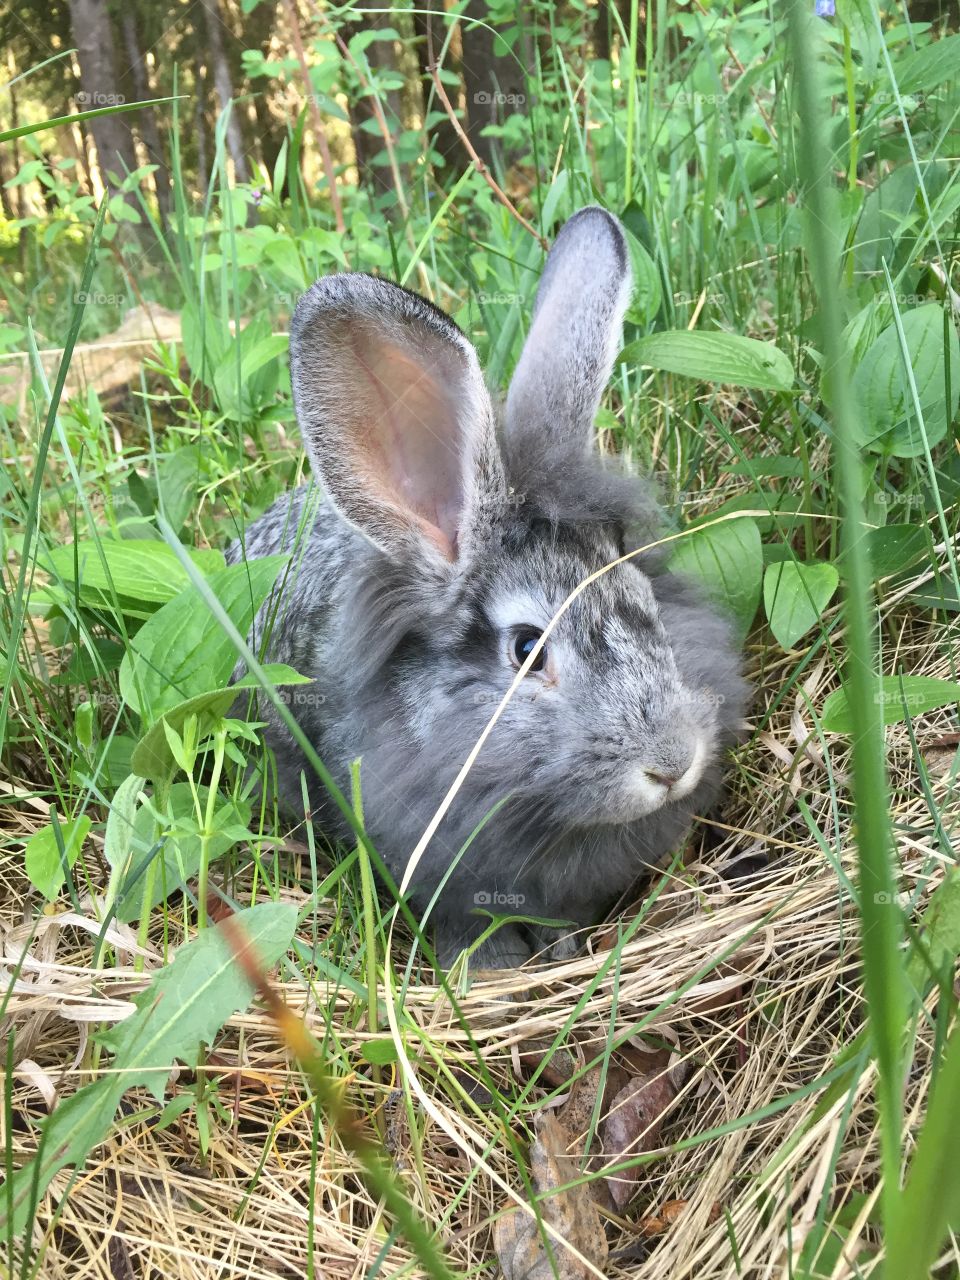 Bunny on our property 

